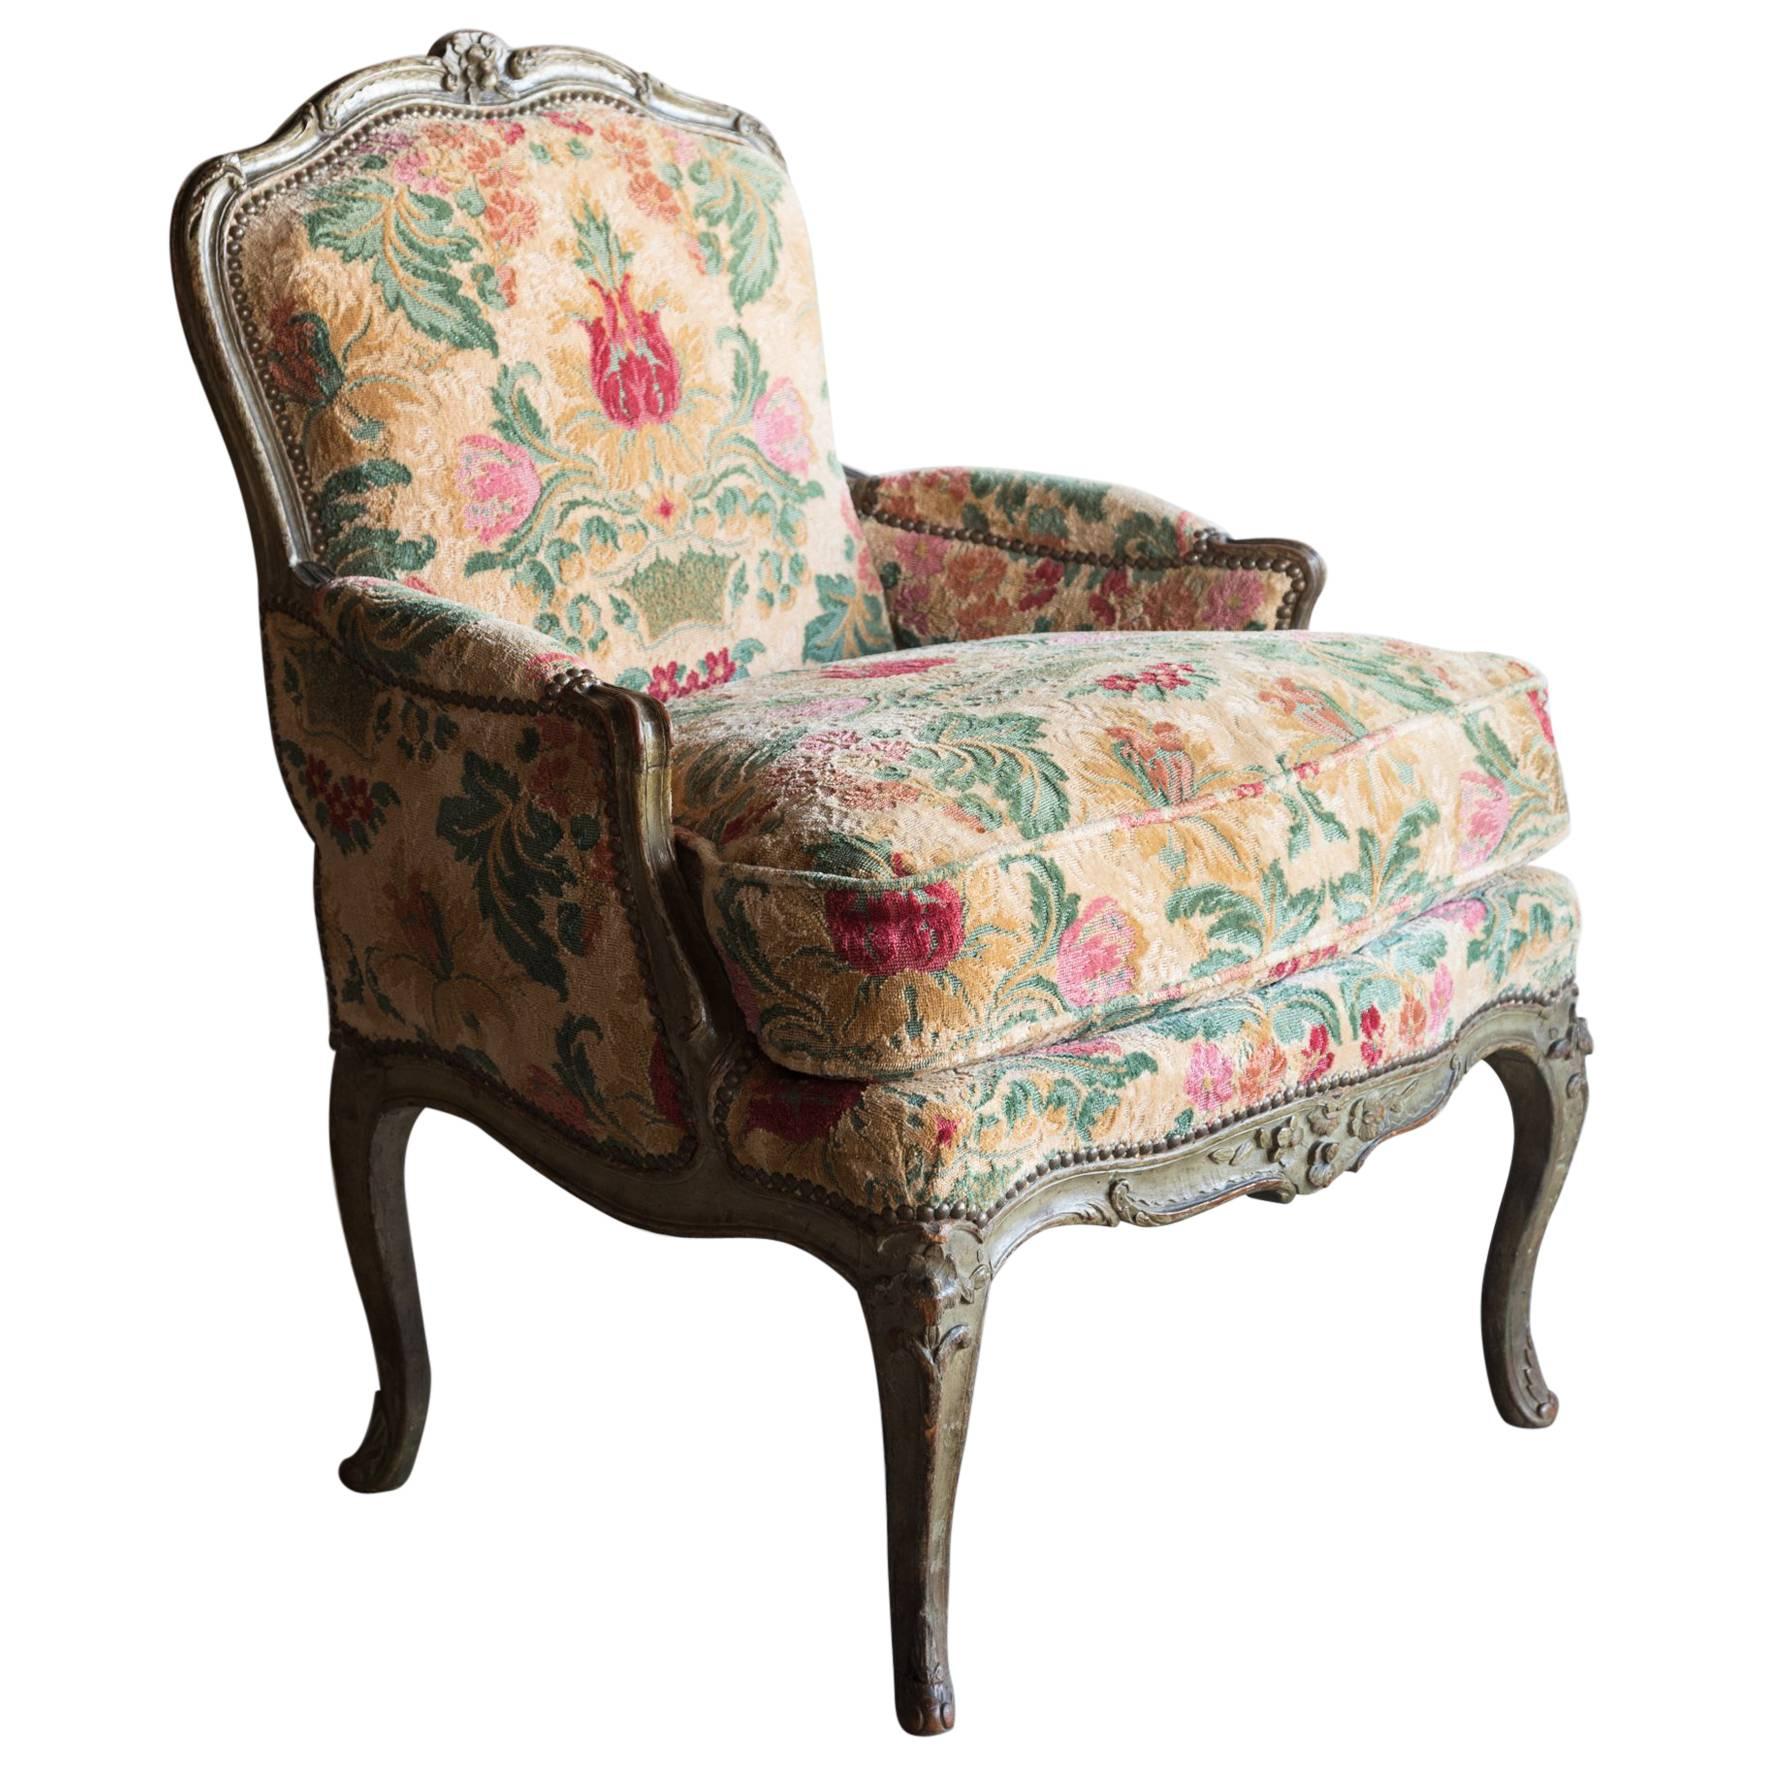 Louis XV Carved Rococo Painted Bergére or Armchair, France, circa 1760